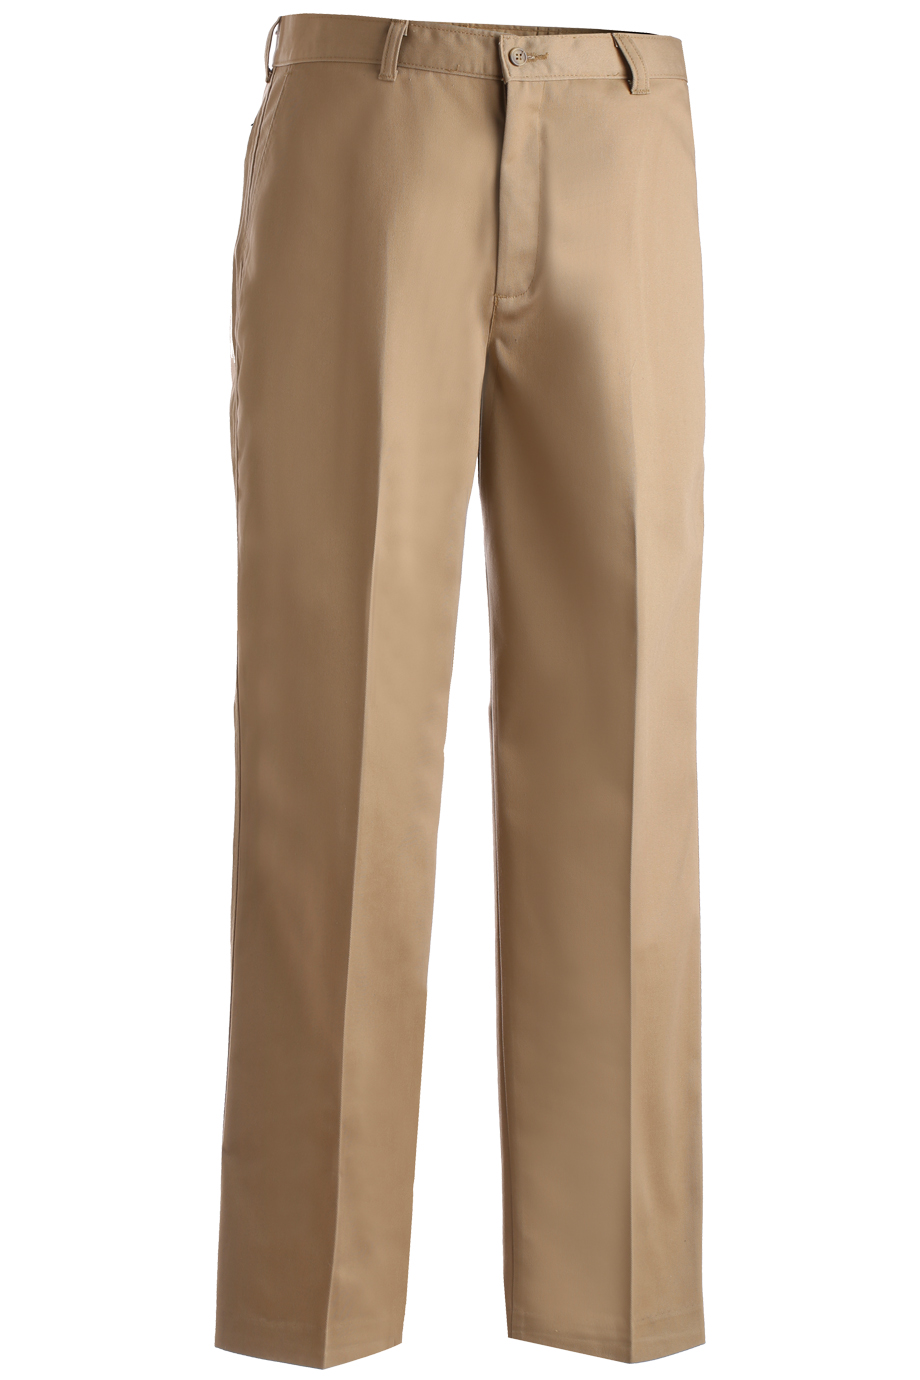 Men's Easy Fit Chino Flat Front Pant 2578